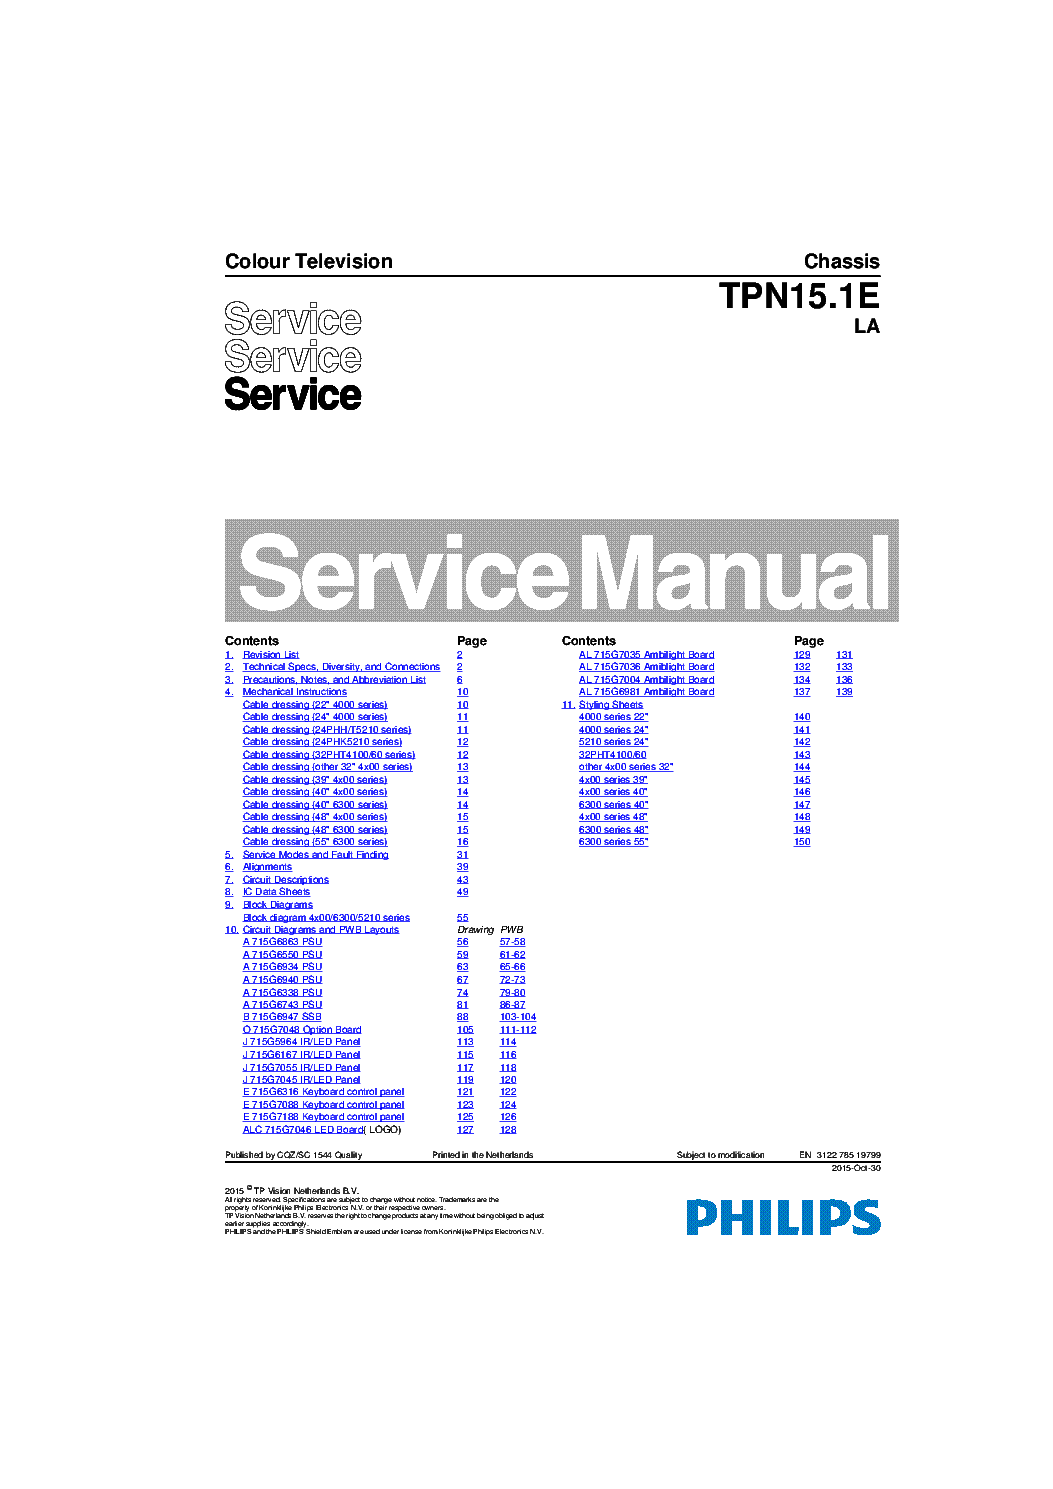 PHILIPS 32PHT4100 12 AND SERIES 4000 4X00 6300 CHASSIS TPN15.1E LA SM service manual (1st page)